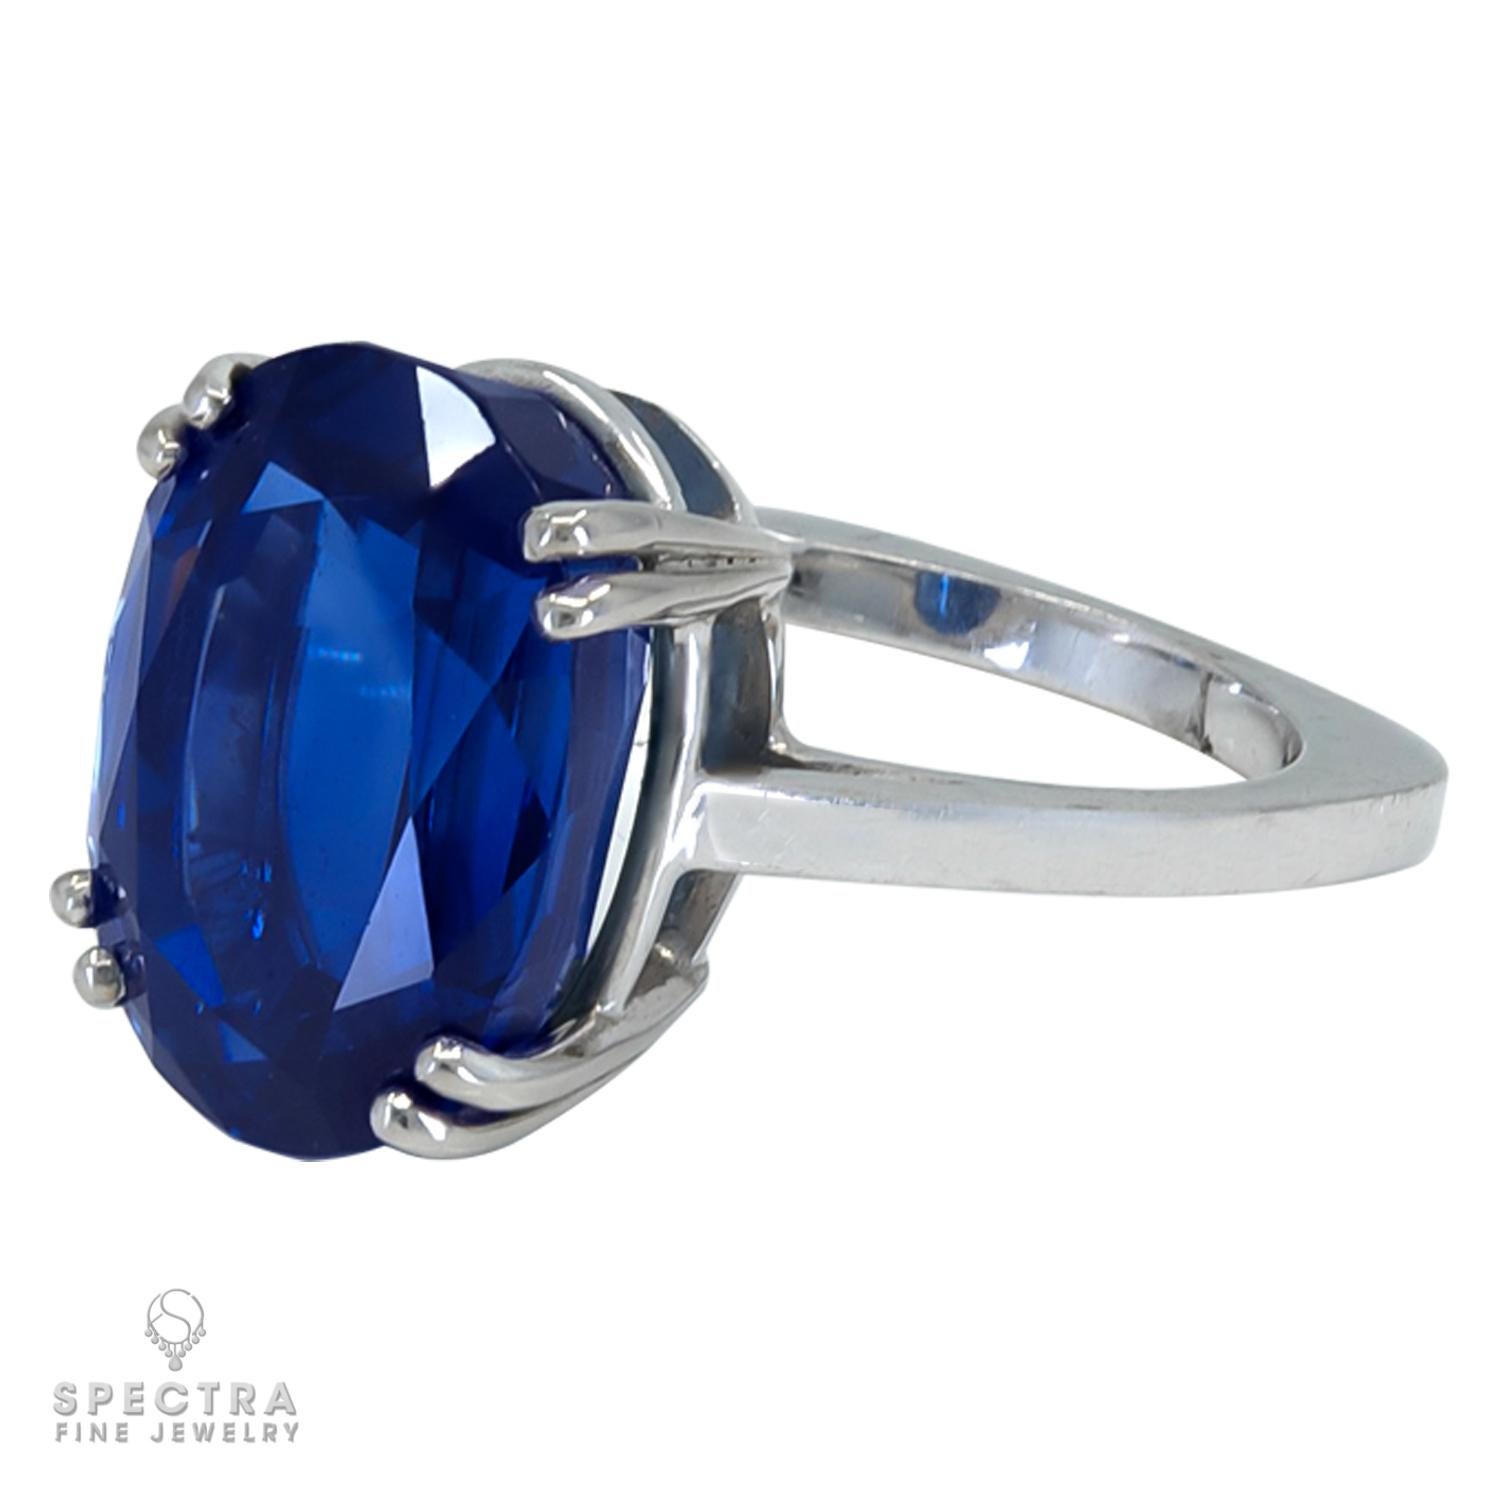 This beautiful cocktail ring is featuring a 15.29 carat natural oval sapphire. 
The sapphire is certified by SSEF, stating that it has no indication of thermal treatment. Origin is undetermined.
The band has a unique shape with two rounded corners